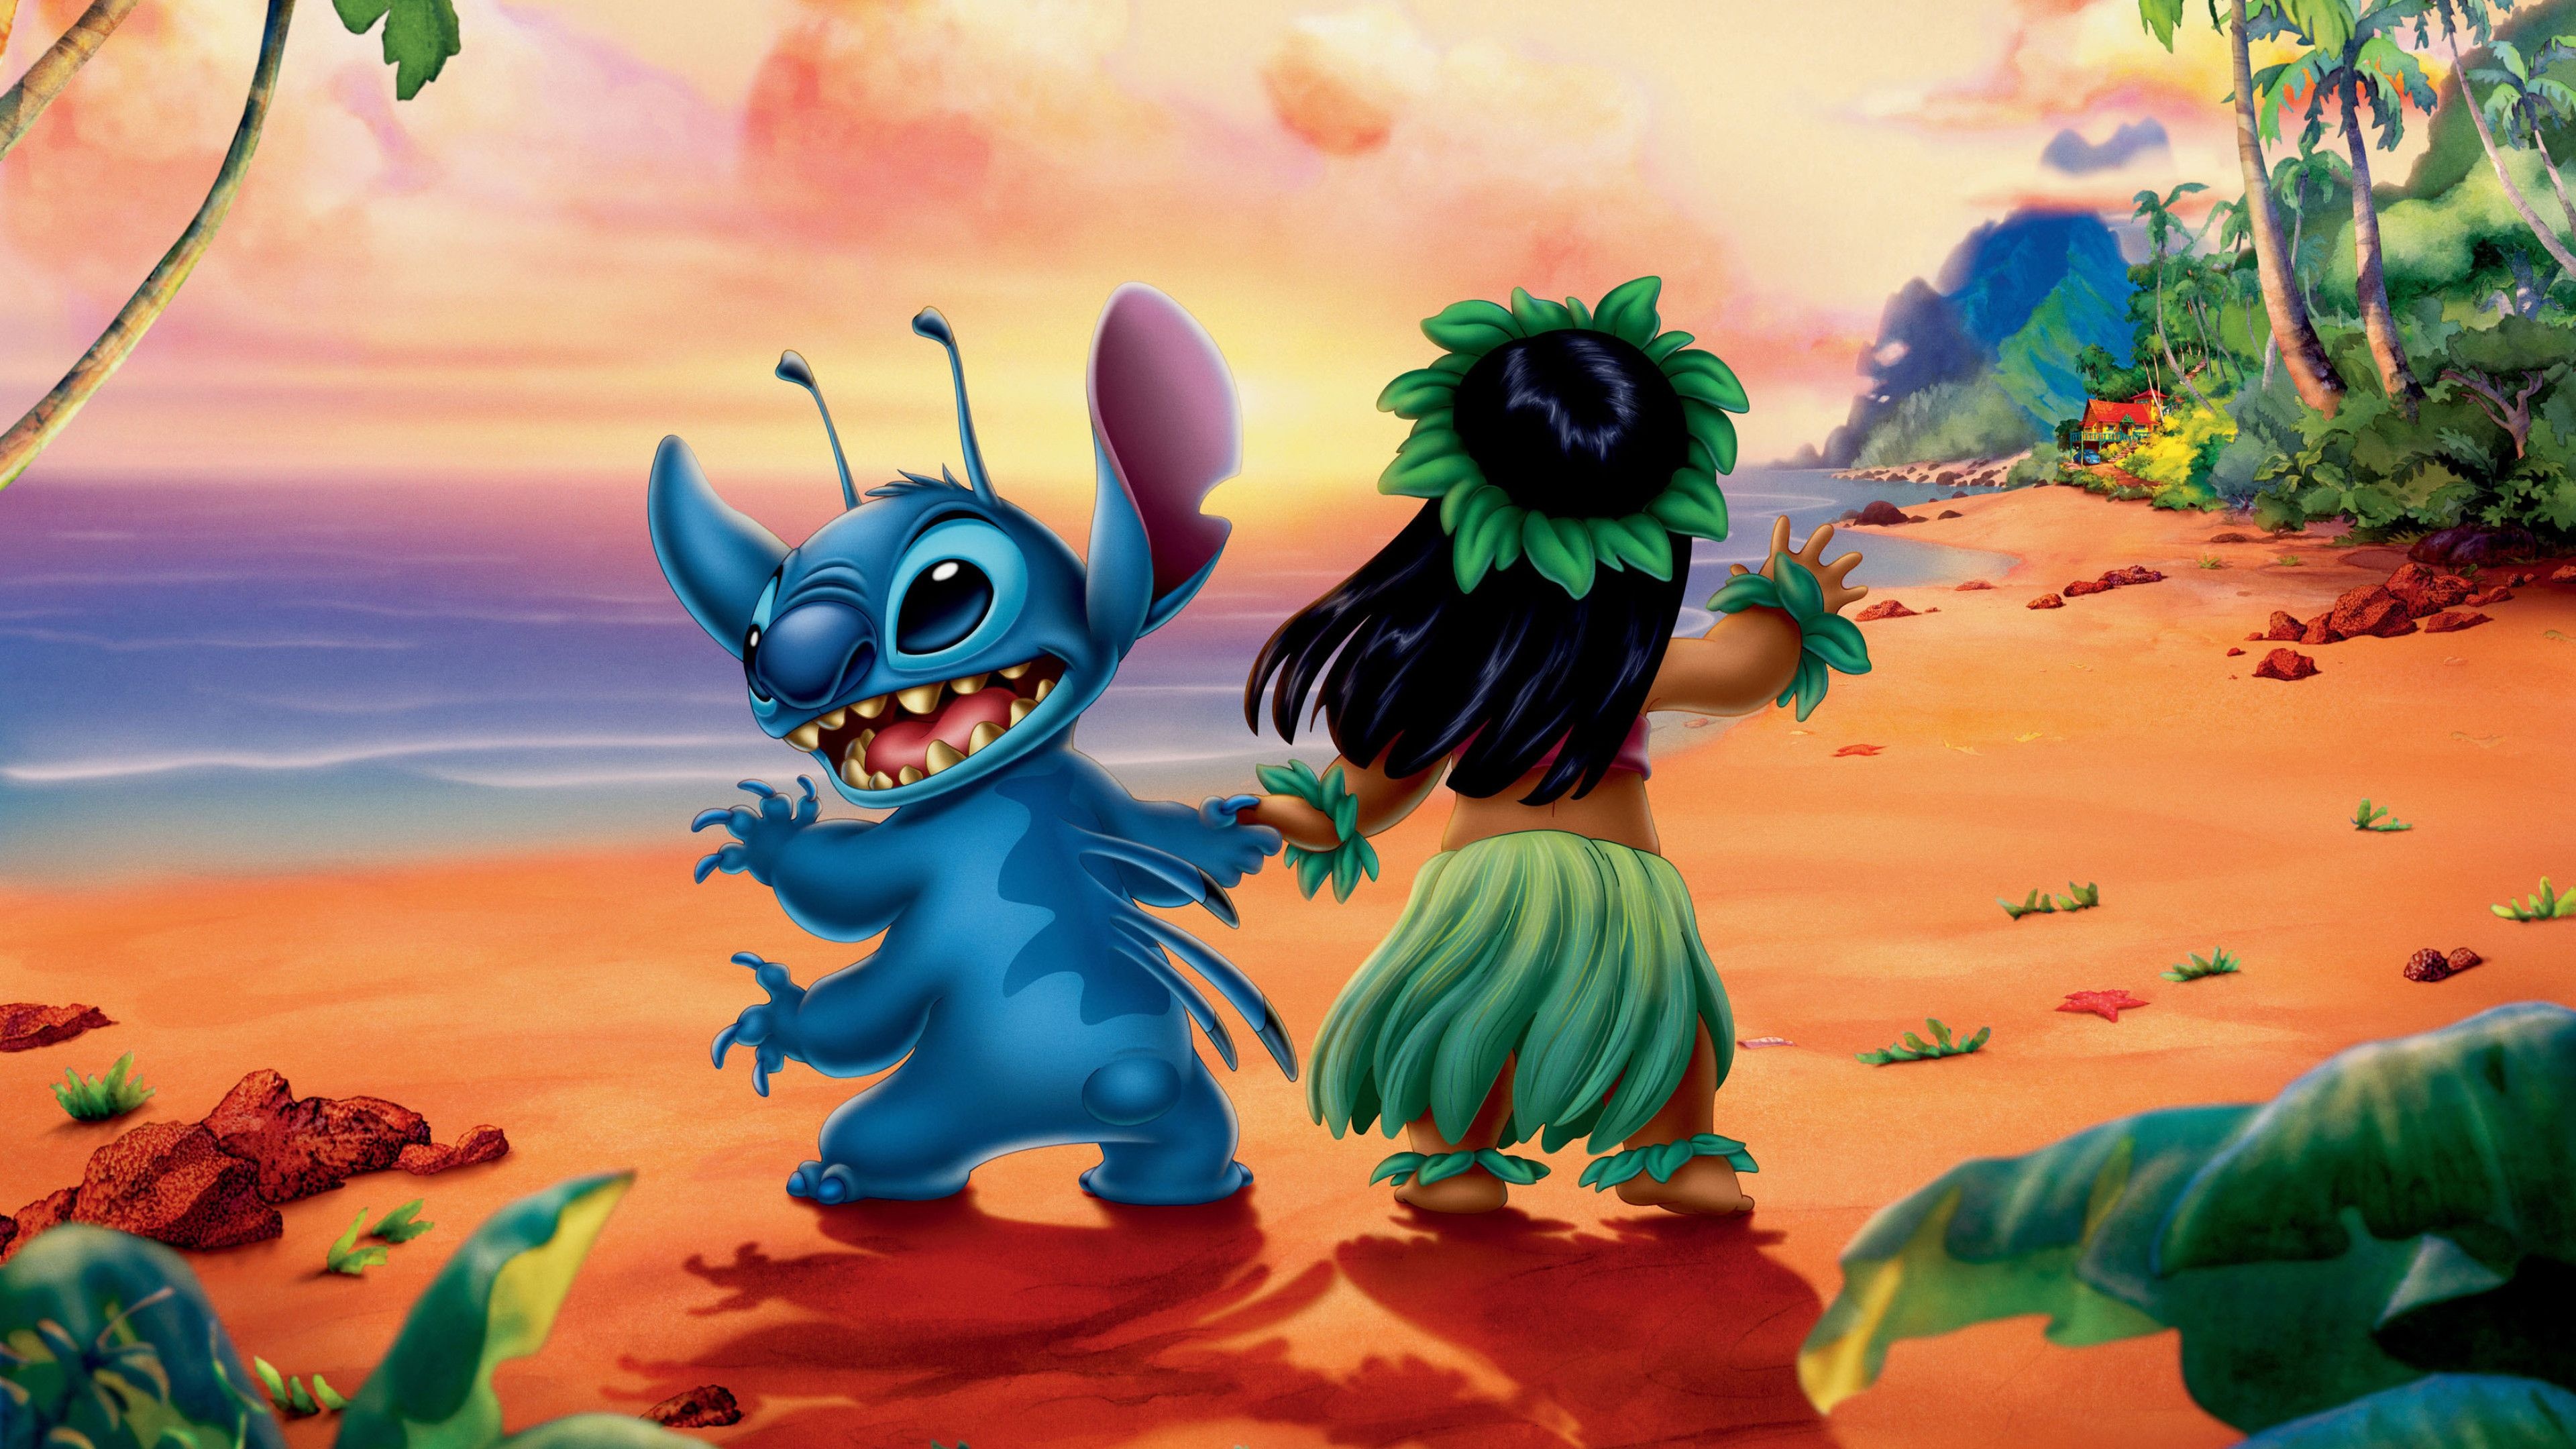 Lilo and Stitch series, Computer wallpapers, Lilo and Stitch, Backgrounds, 3840x2160 4K Desktop